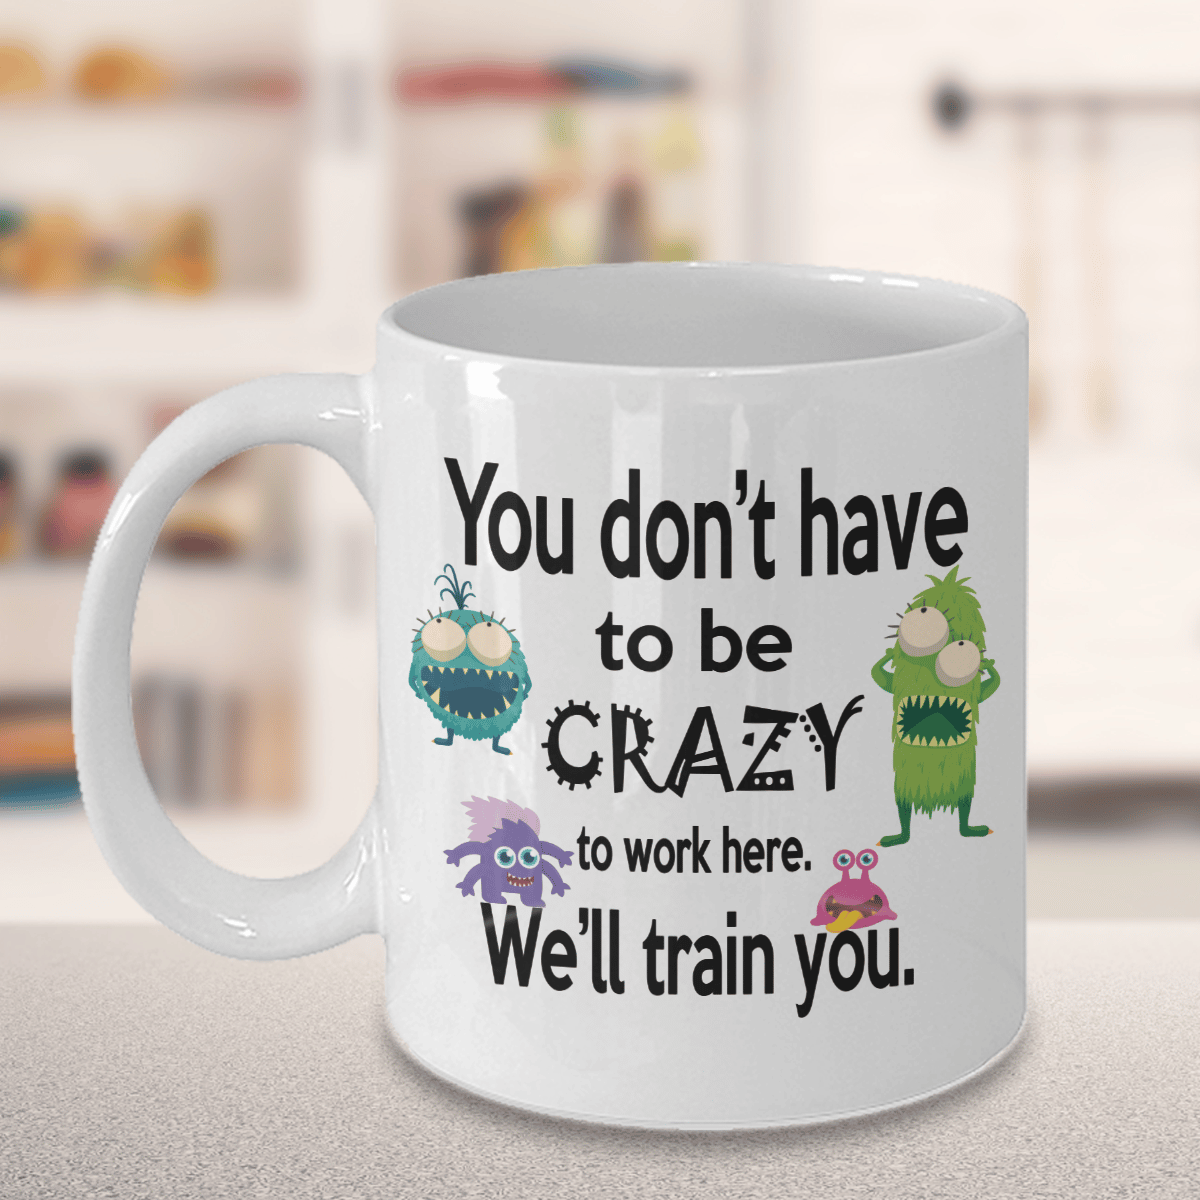 Funny Office Coffee Mug. Gift for co